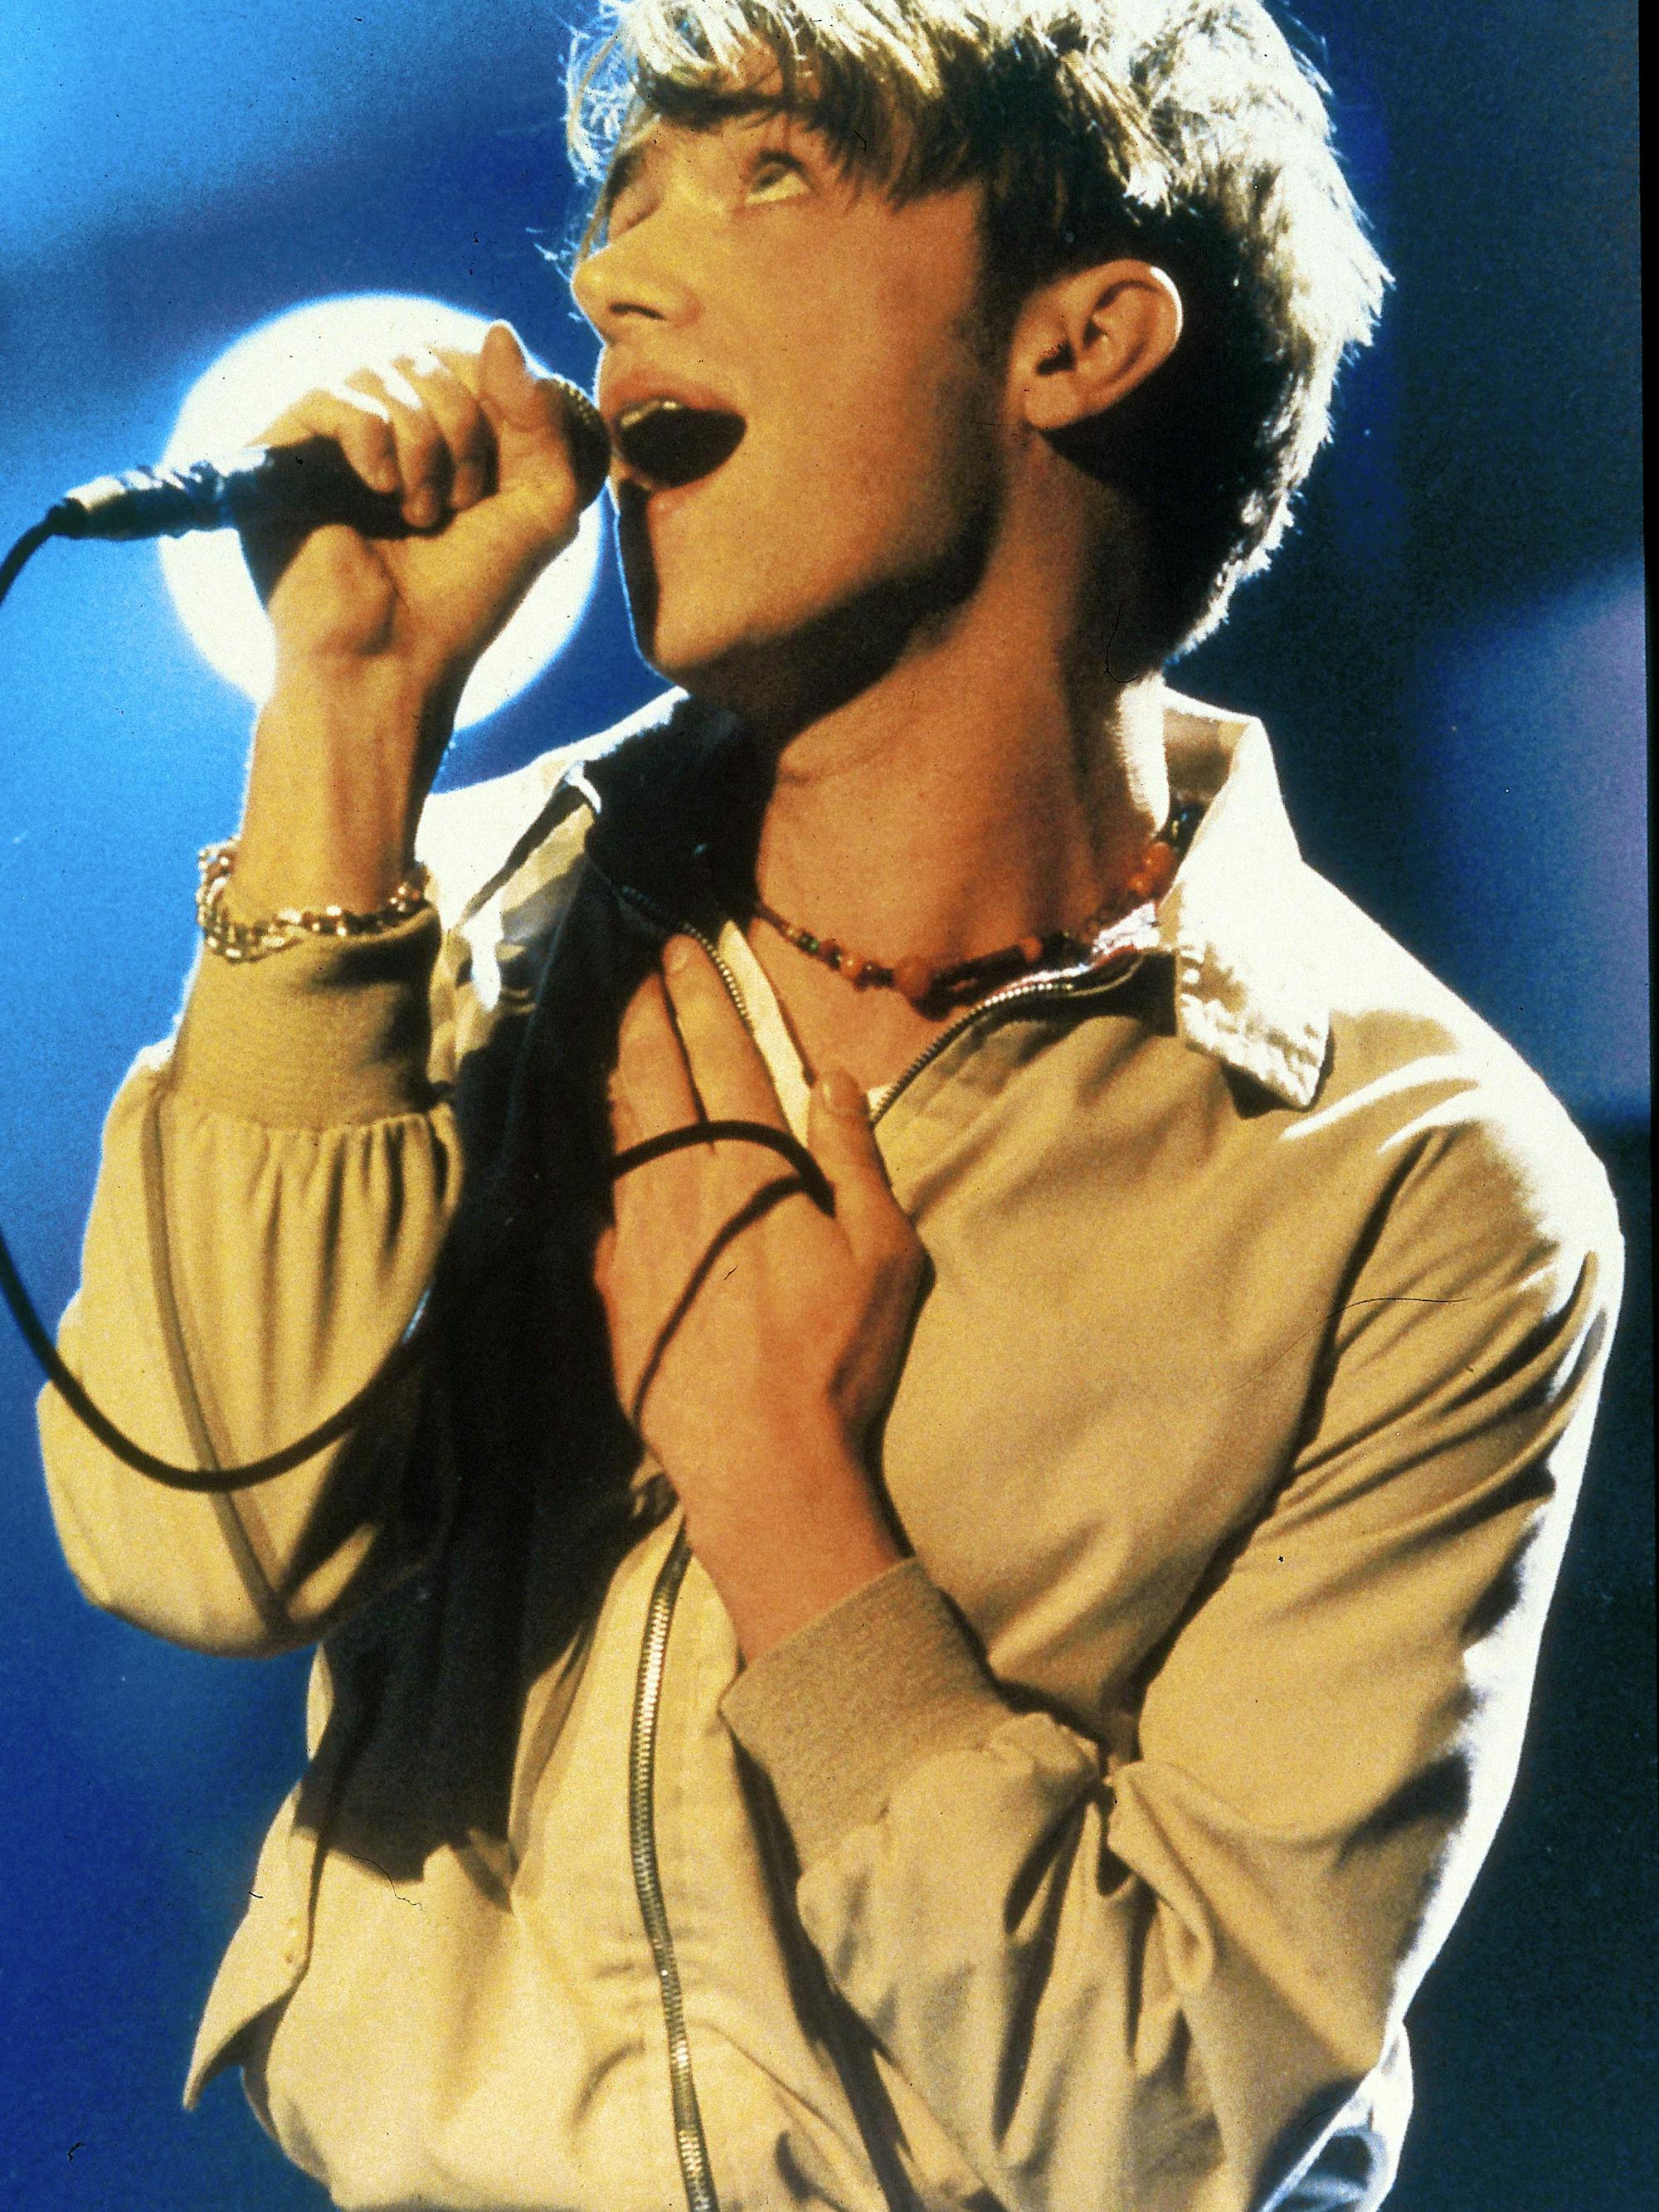 Damon Albarn sings into a microphone with his hand on his chest. 